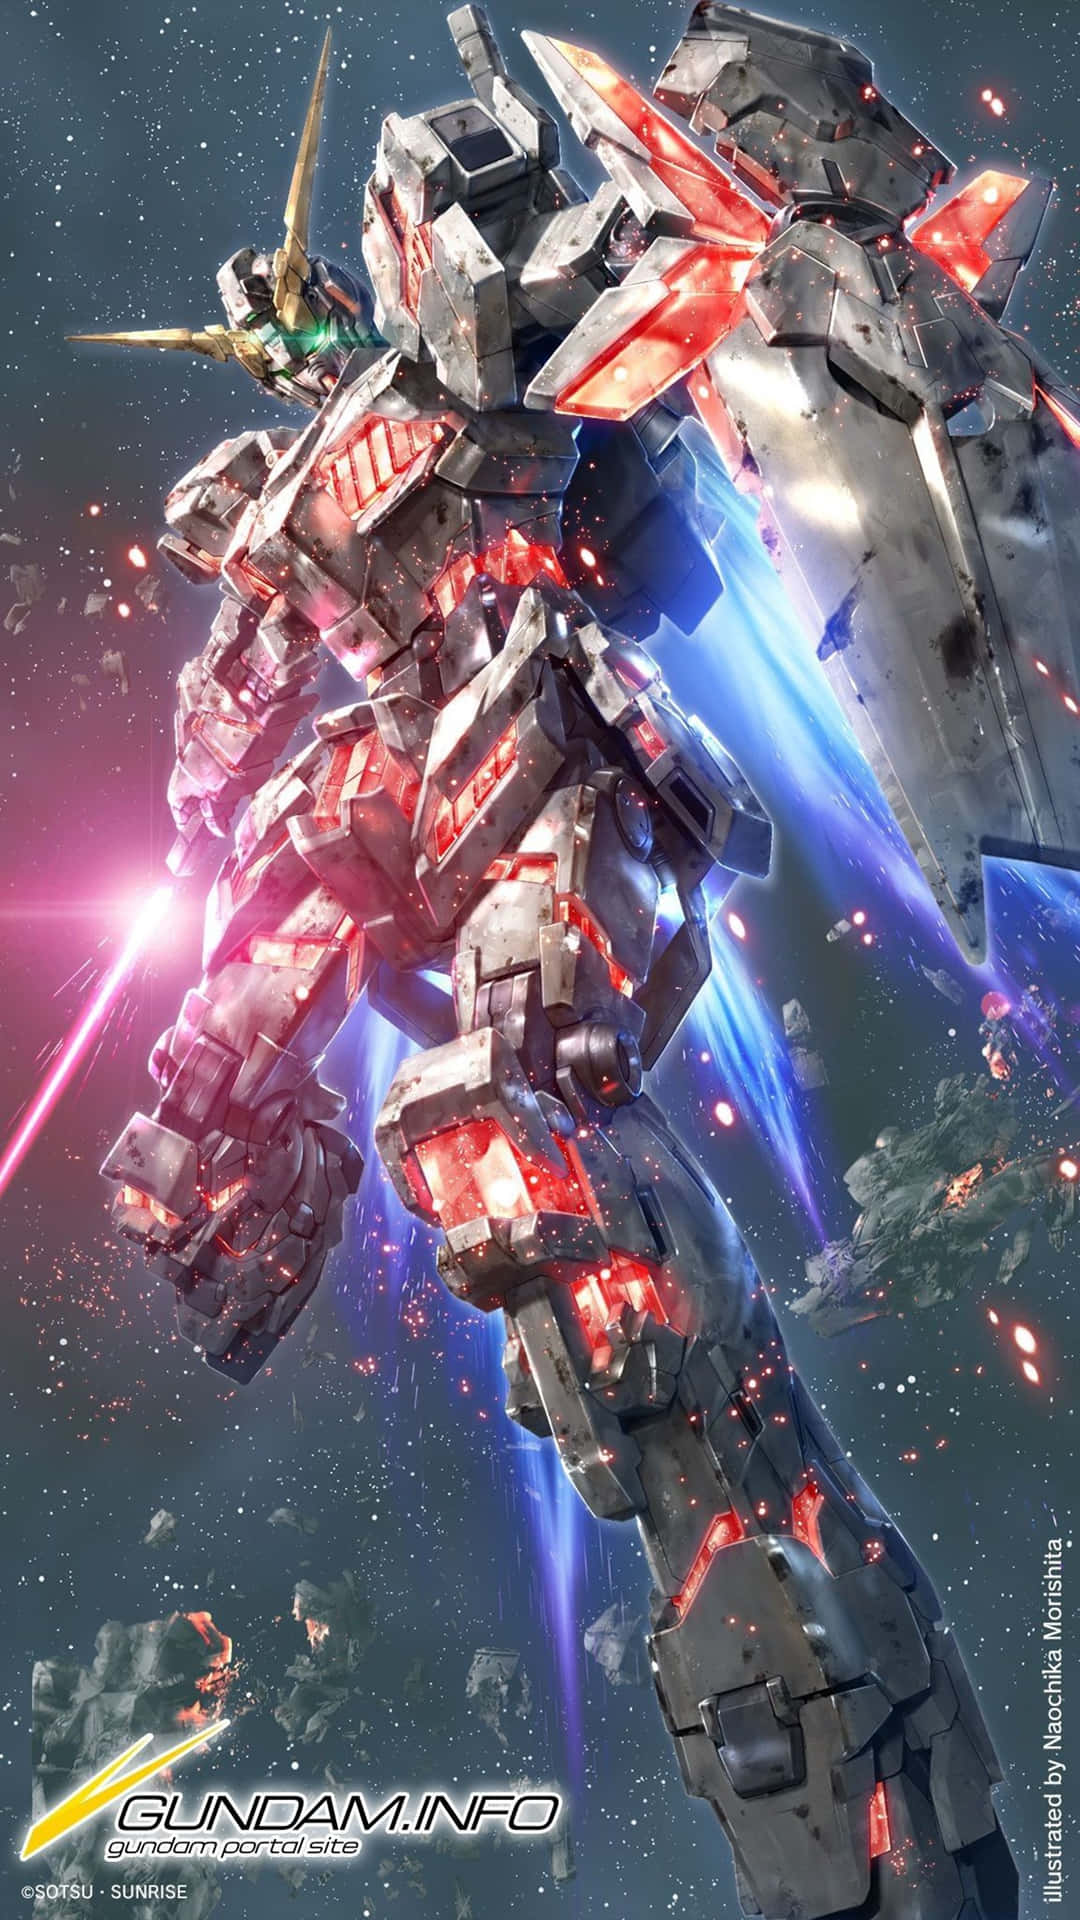 Get ready to experience the power and creativity of the Gundam 4K! Wallpaper